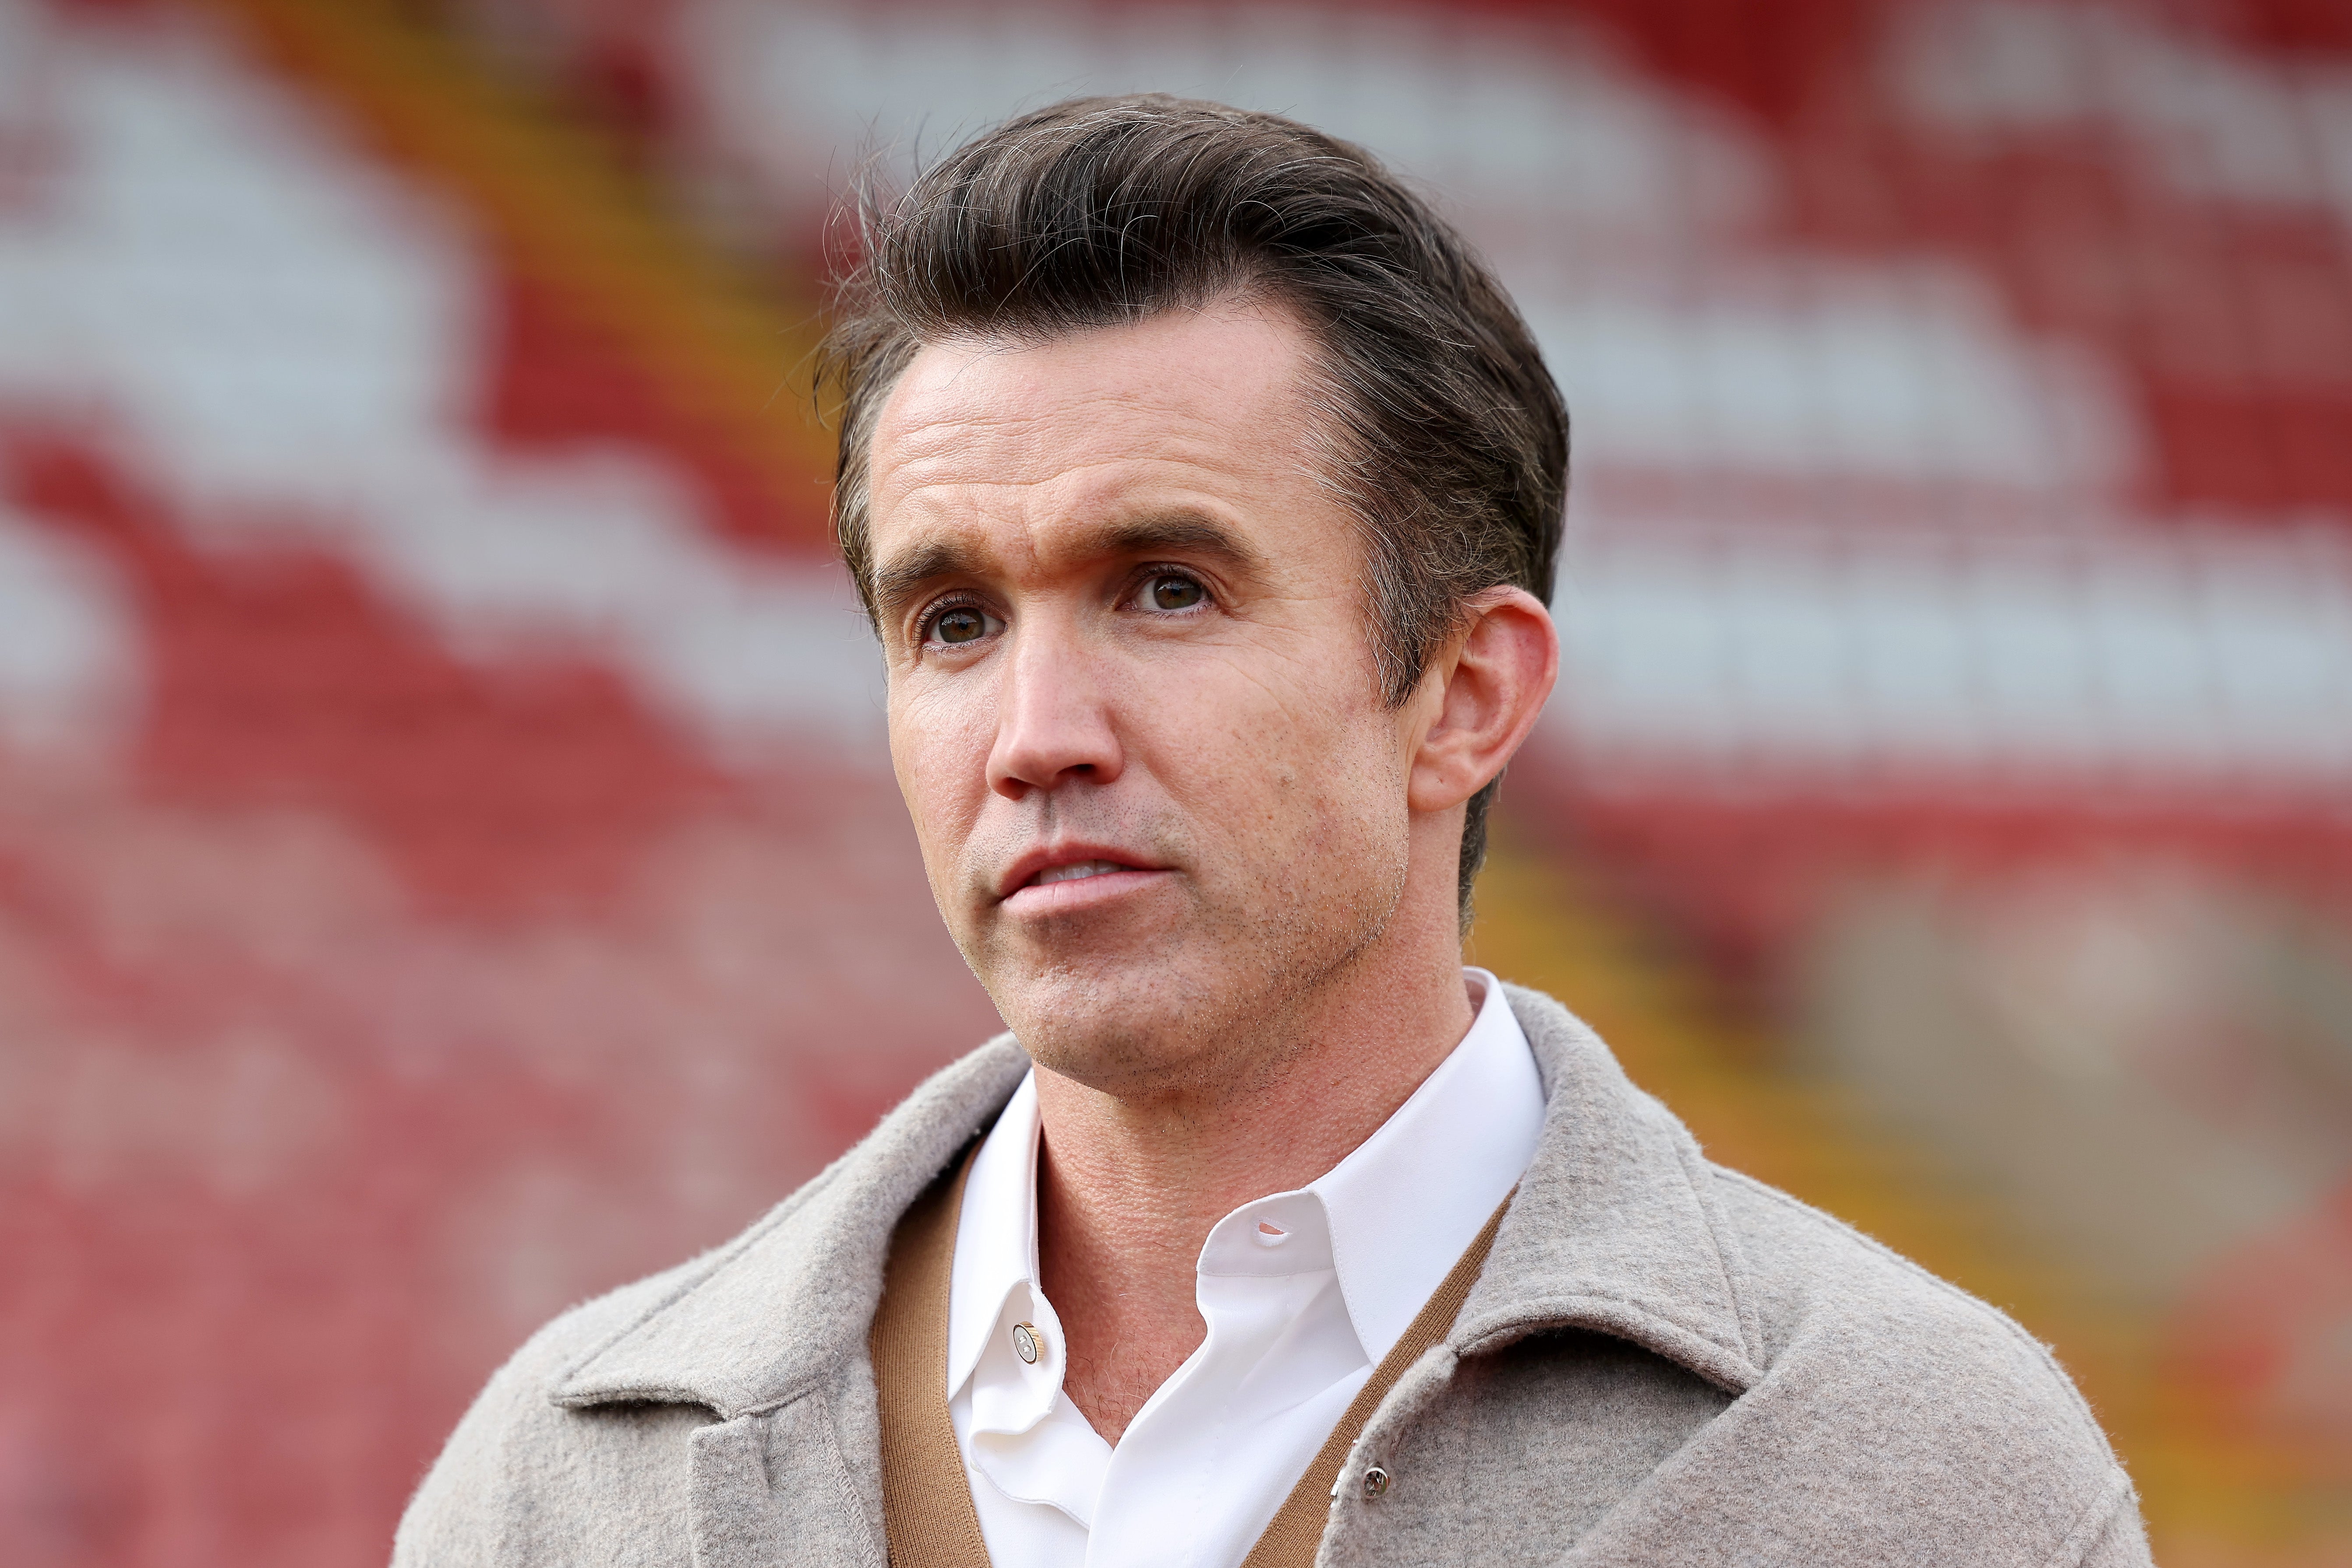 Rob McElhenney is the co-owner of Wrexham